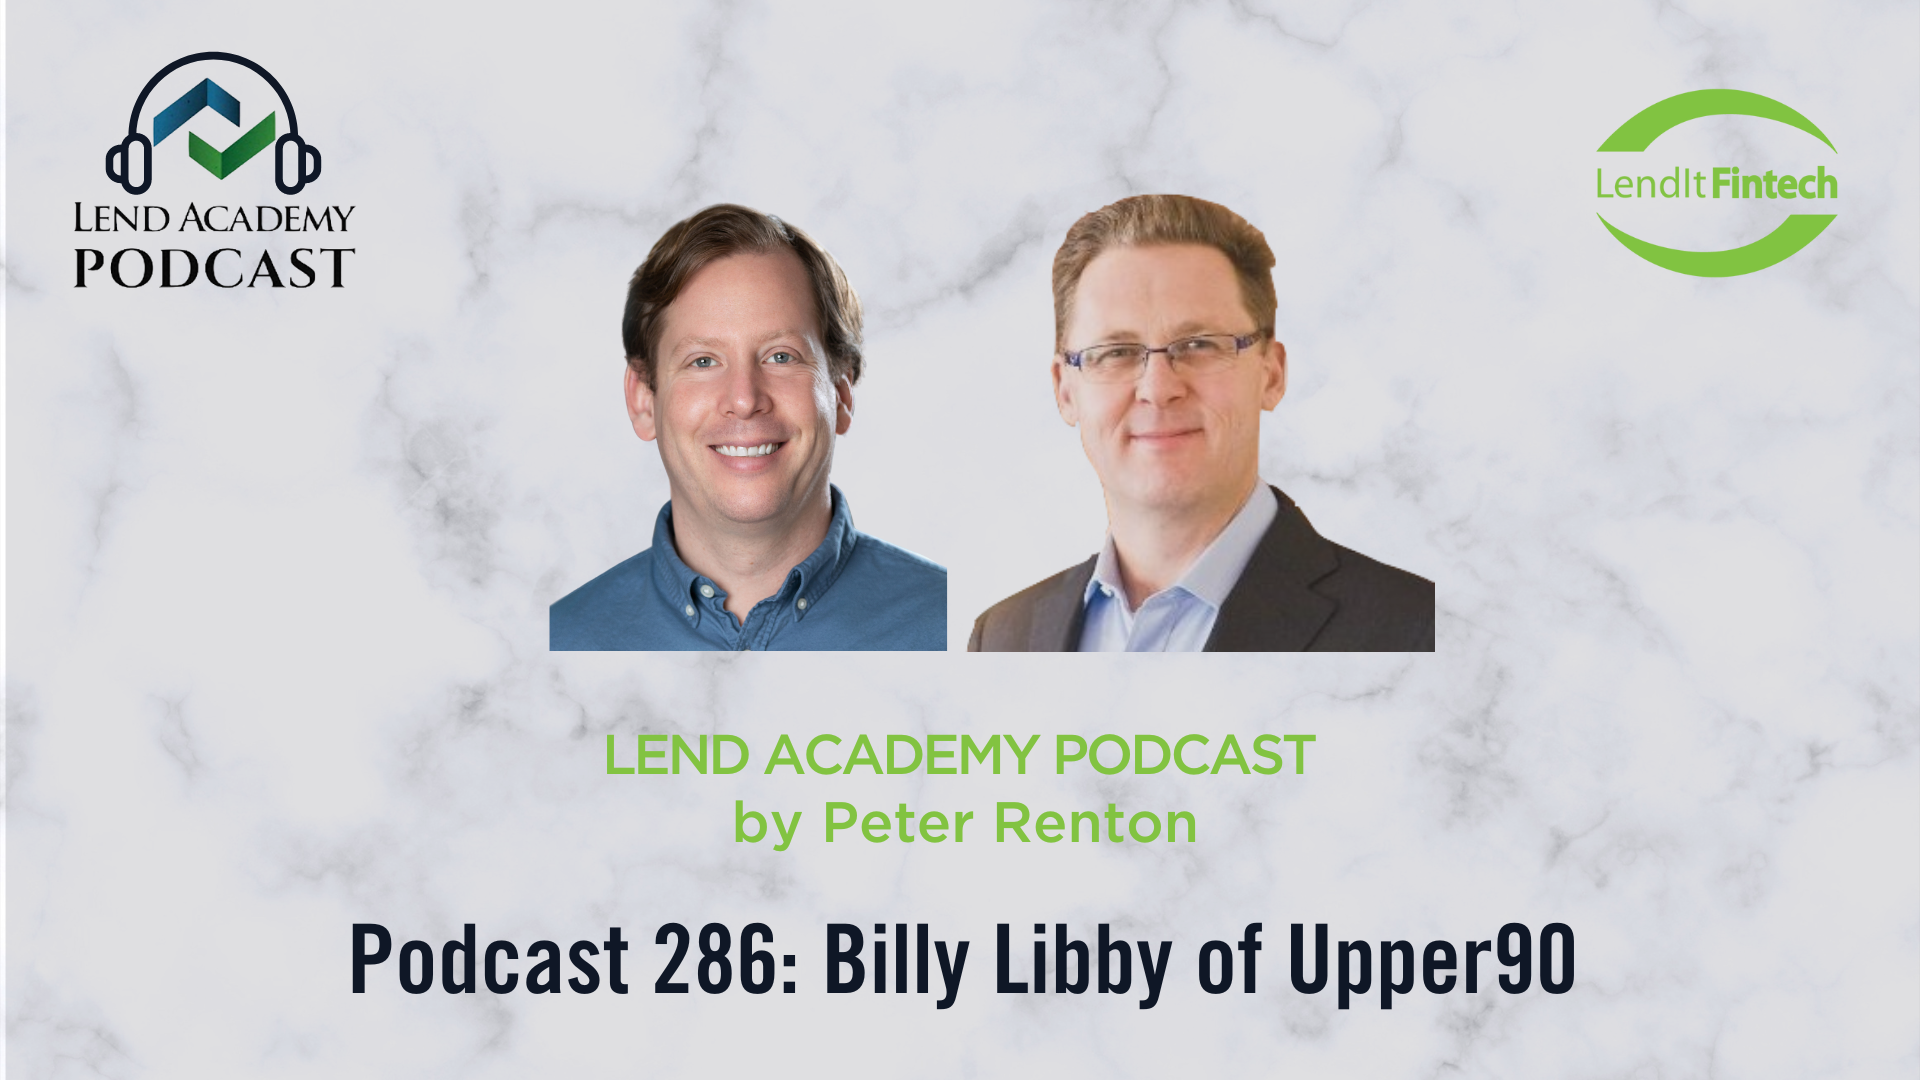 Billy Libby, Co-Founder & CEO of Upper90